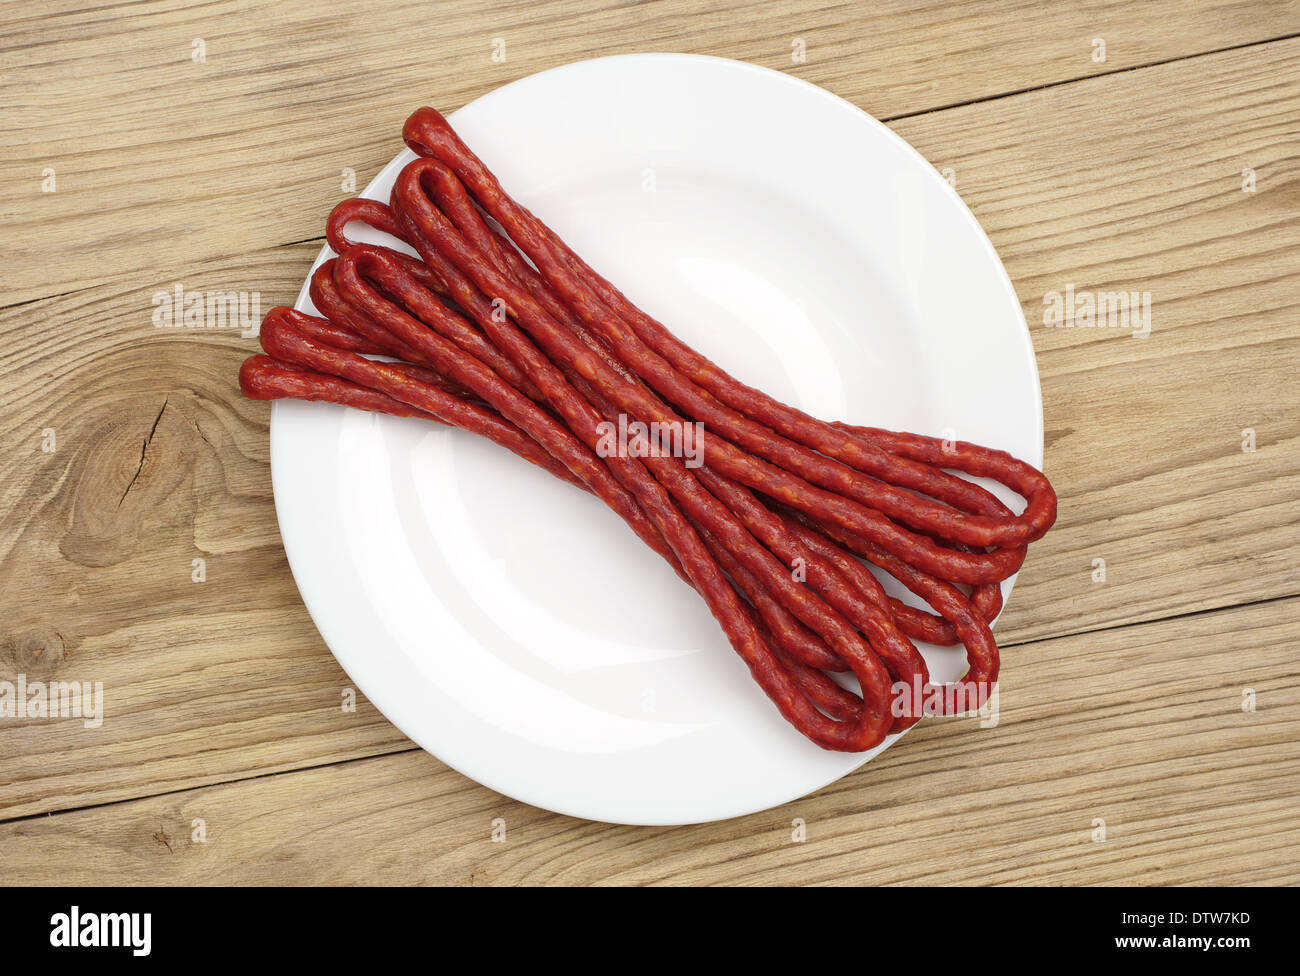 Thin dried sausages on white plate. Top view Stock Photo